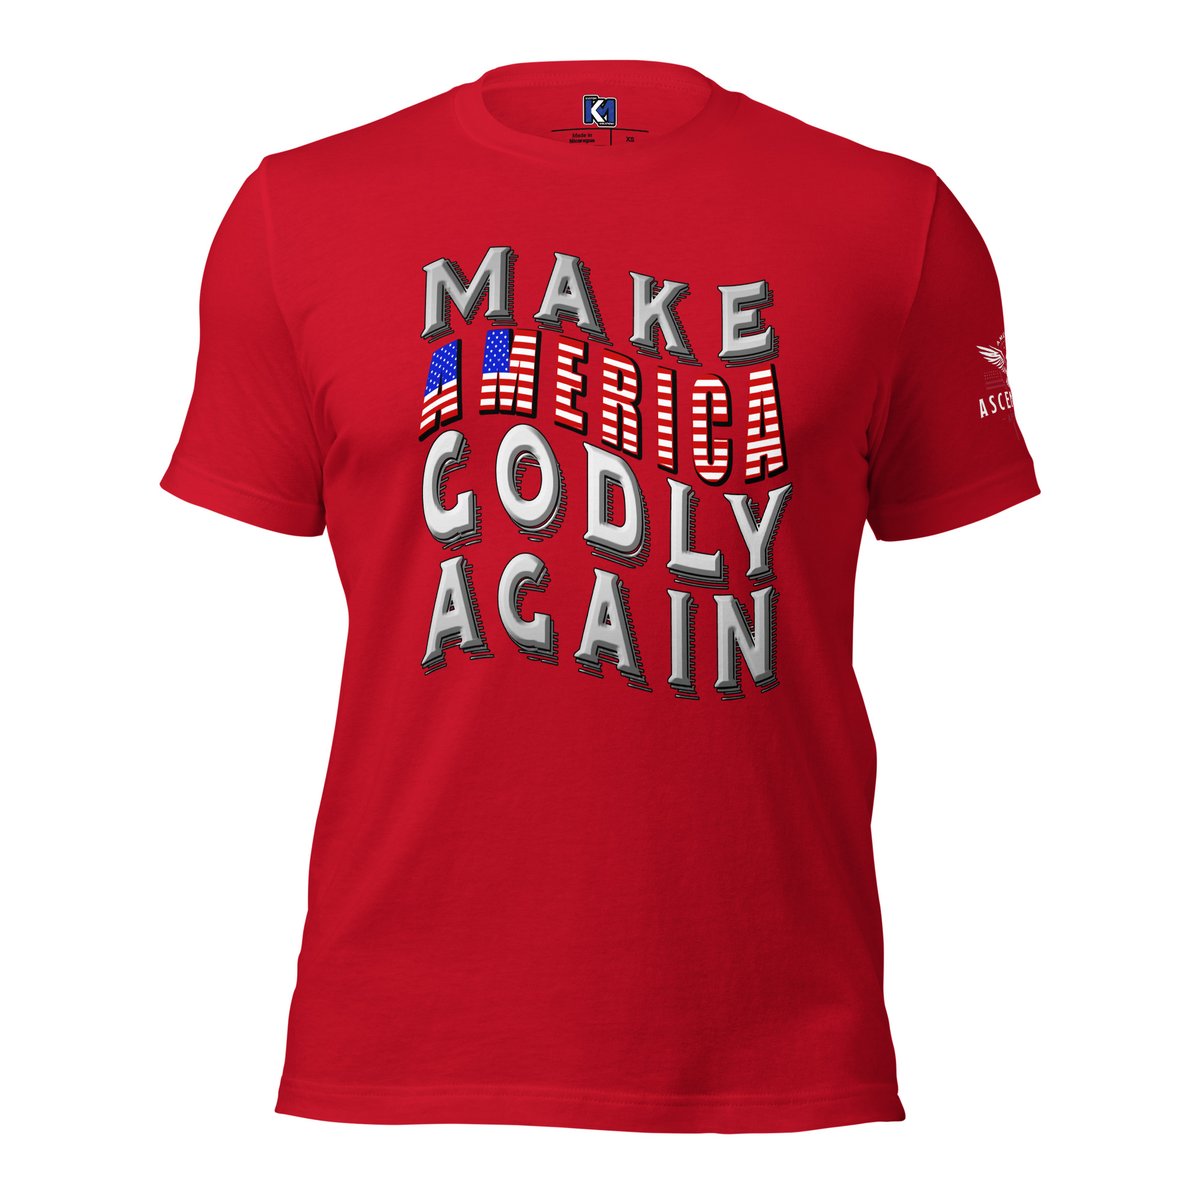 Check out our MAGA Christian T Shirt at wix.to/EjbRJOs
#maga #graphictees #apparel #brand #clothingline #america #patriotic #amen #christian